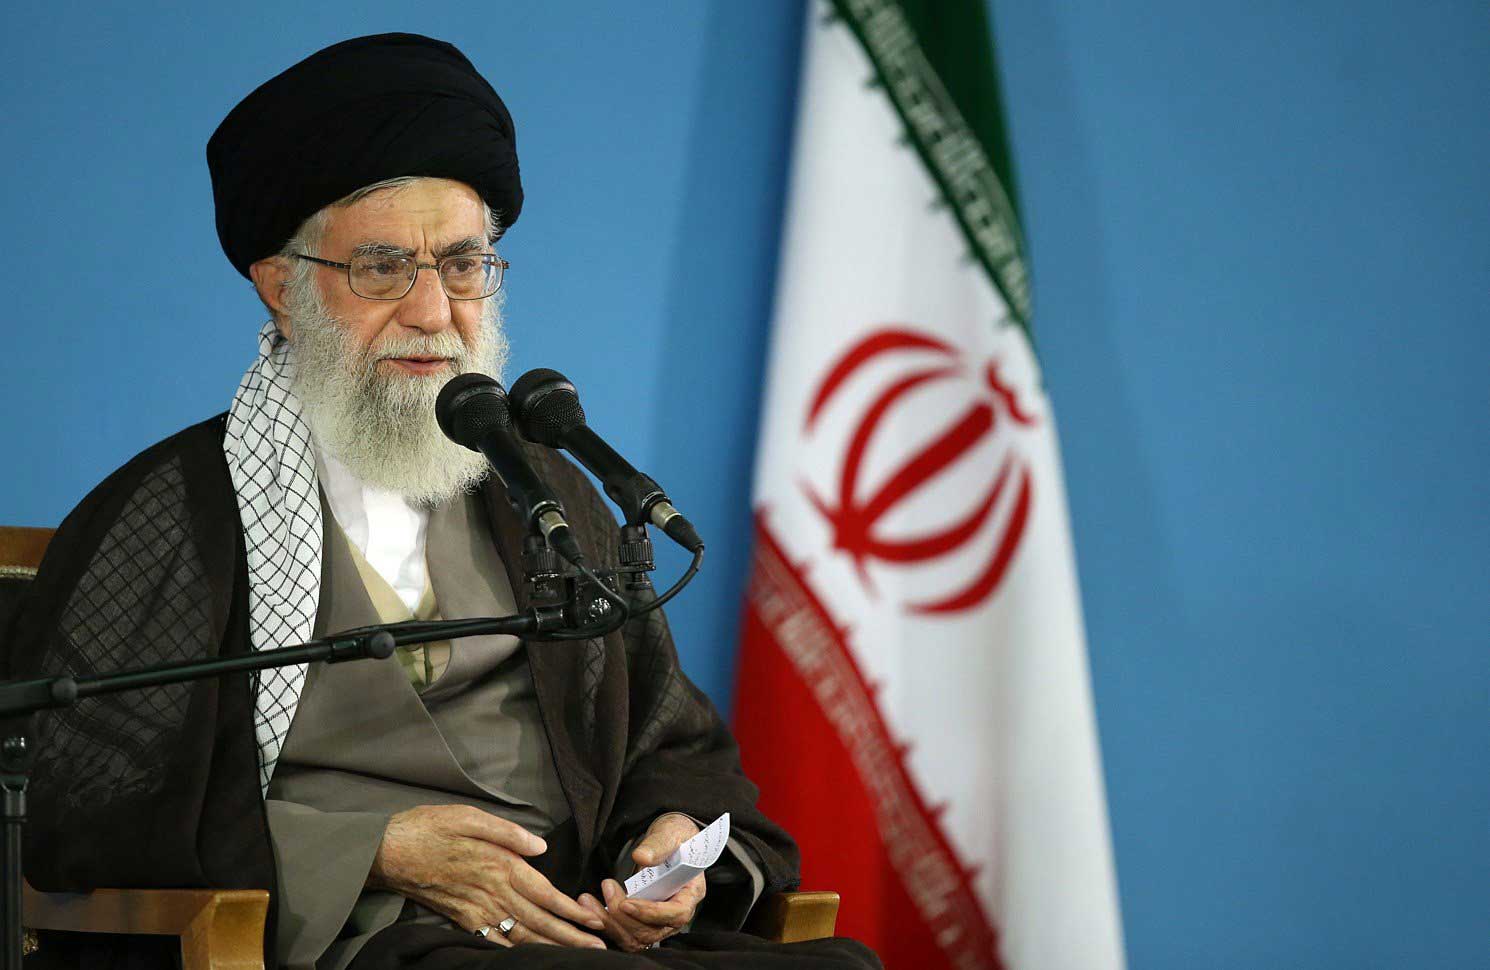 Iran's Supreme Leader Ayatollah Ali Khamenei shows him delivering a speech during a meeting in Tehran on Sept. 9, 2015. (AFP/Getty Images)